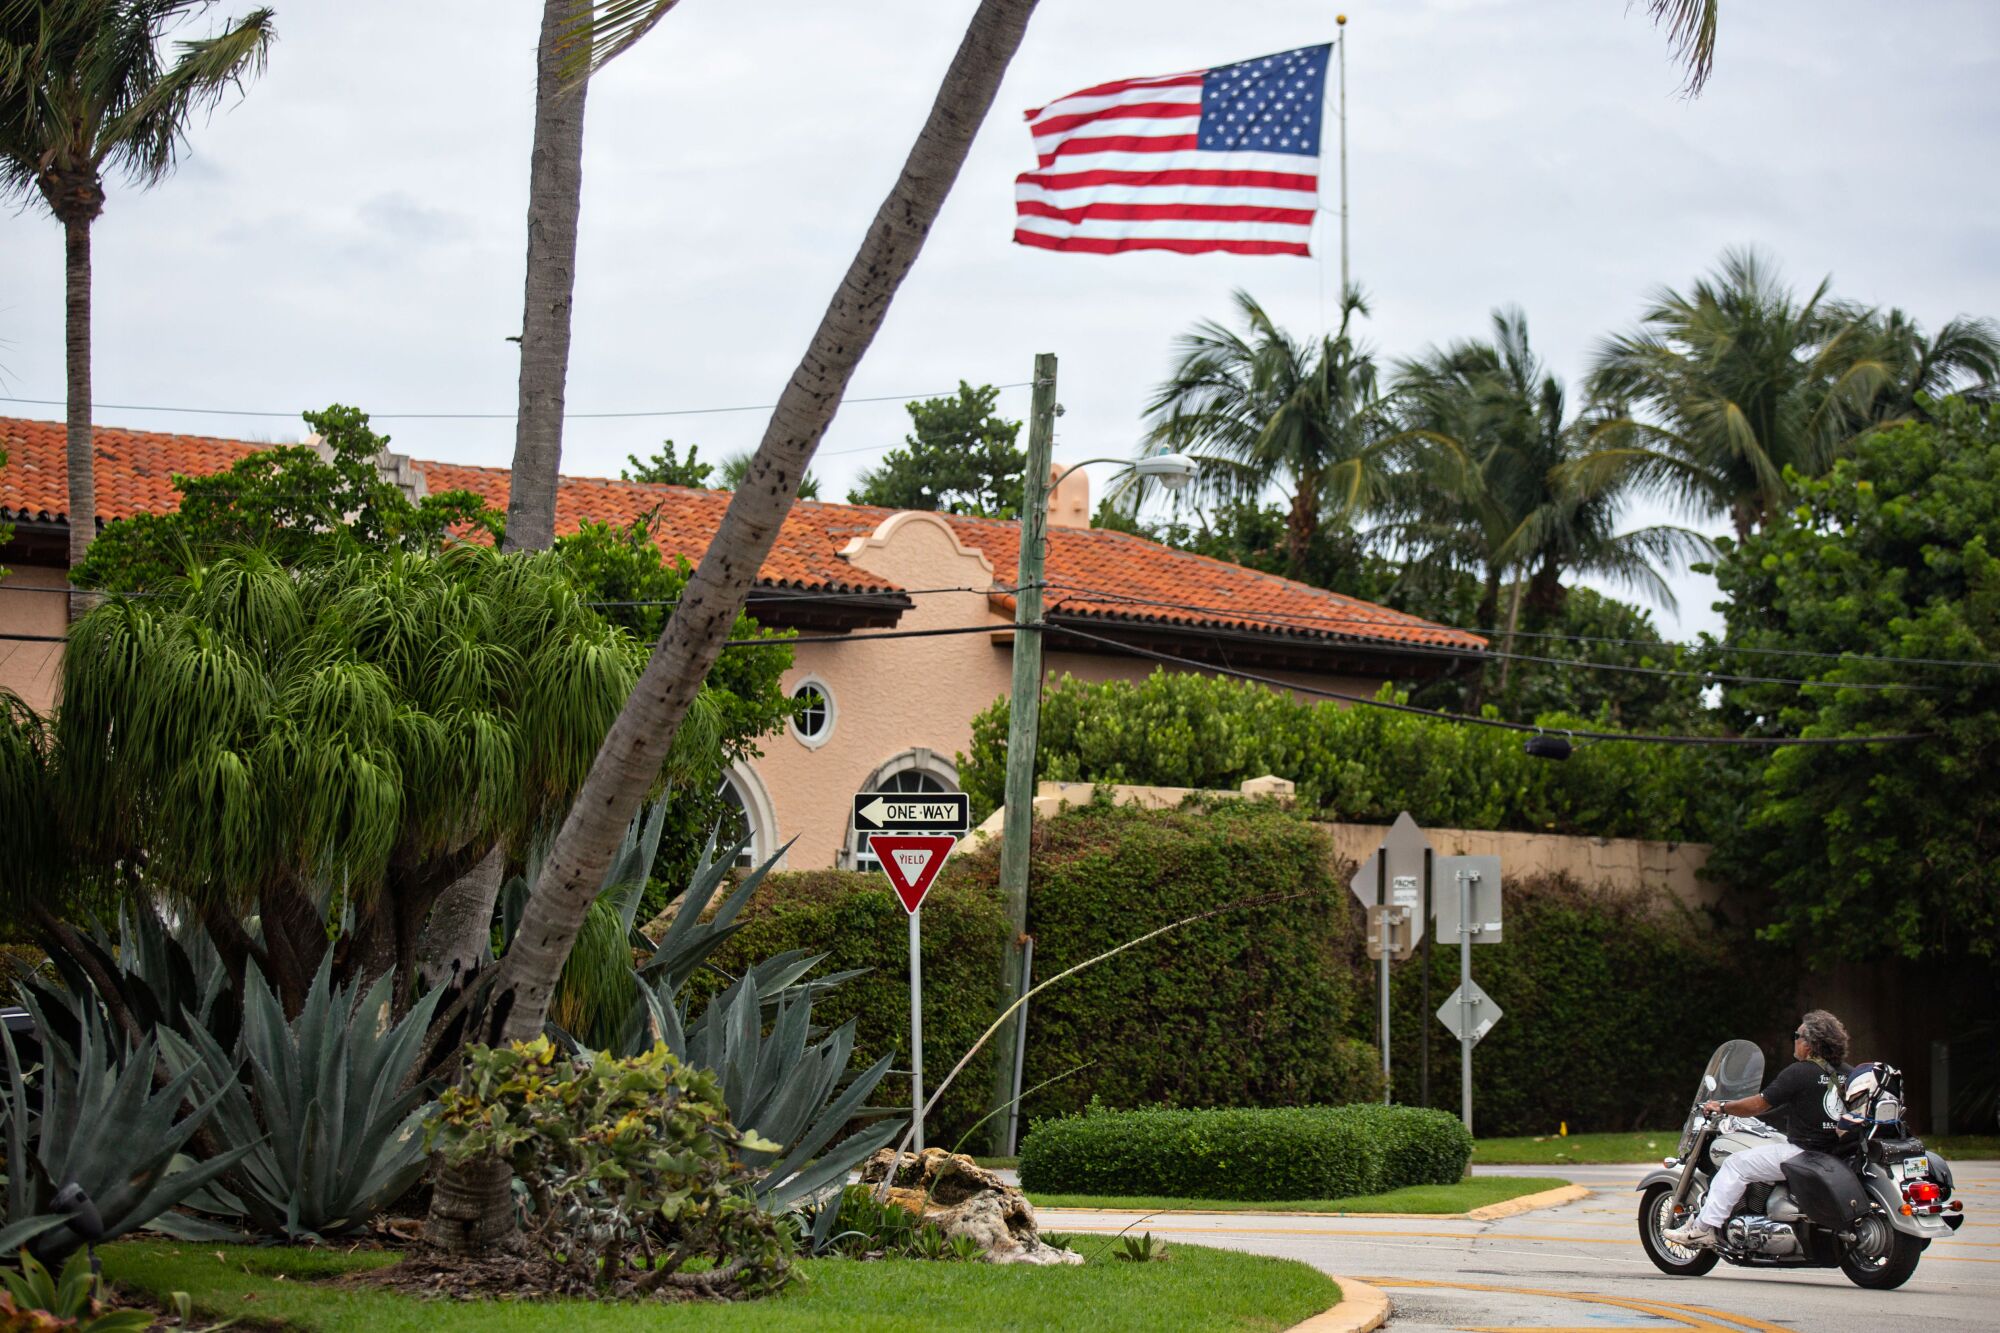 A large U.S. flag flies over Mar-a-Lago Club, seen from the street.